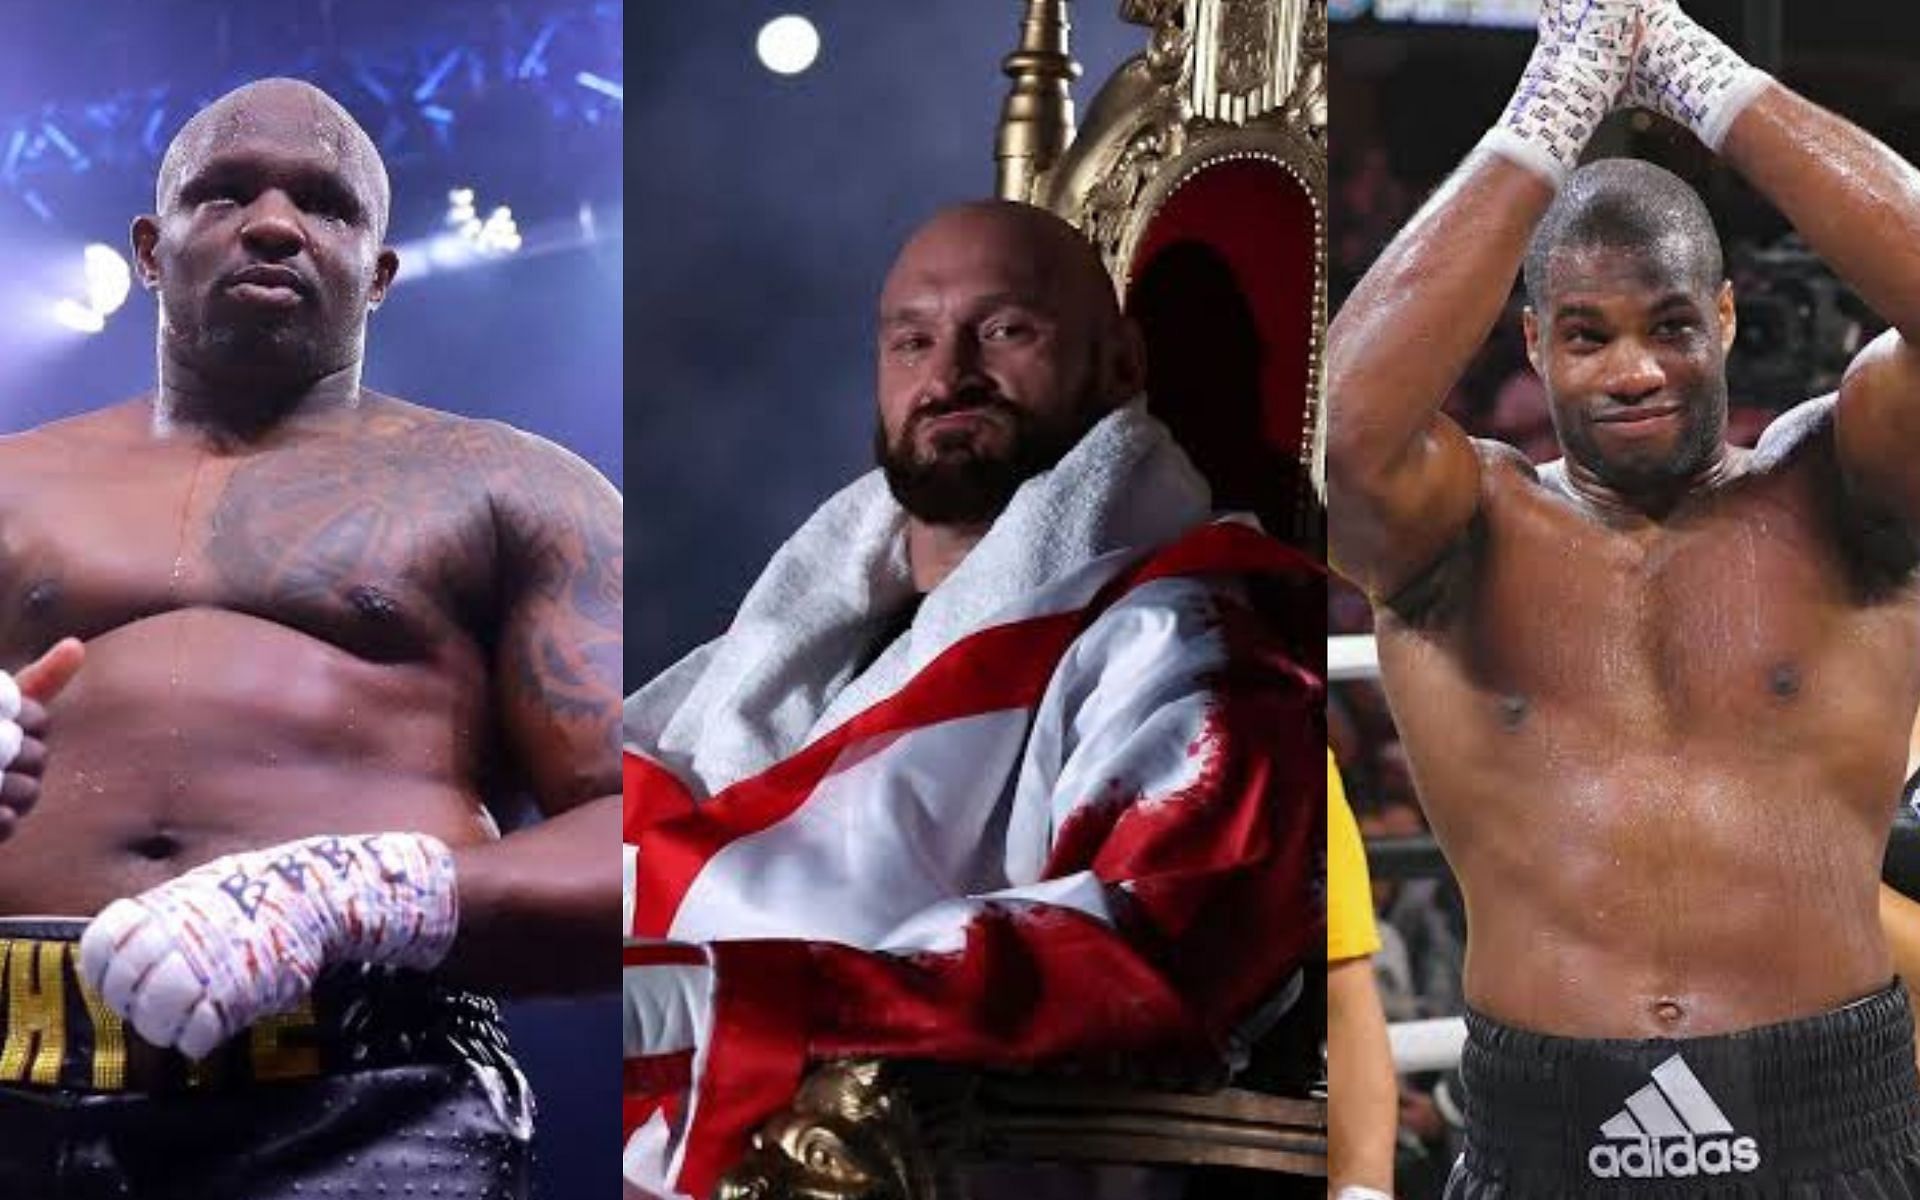 Tyson Fury (middle) advises Dillian Whyte (left) to take on Daniel Dubois (right) in an all-British heavyweight clash. (Photos by Getty Images)